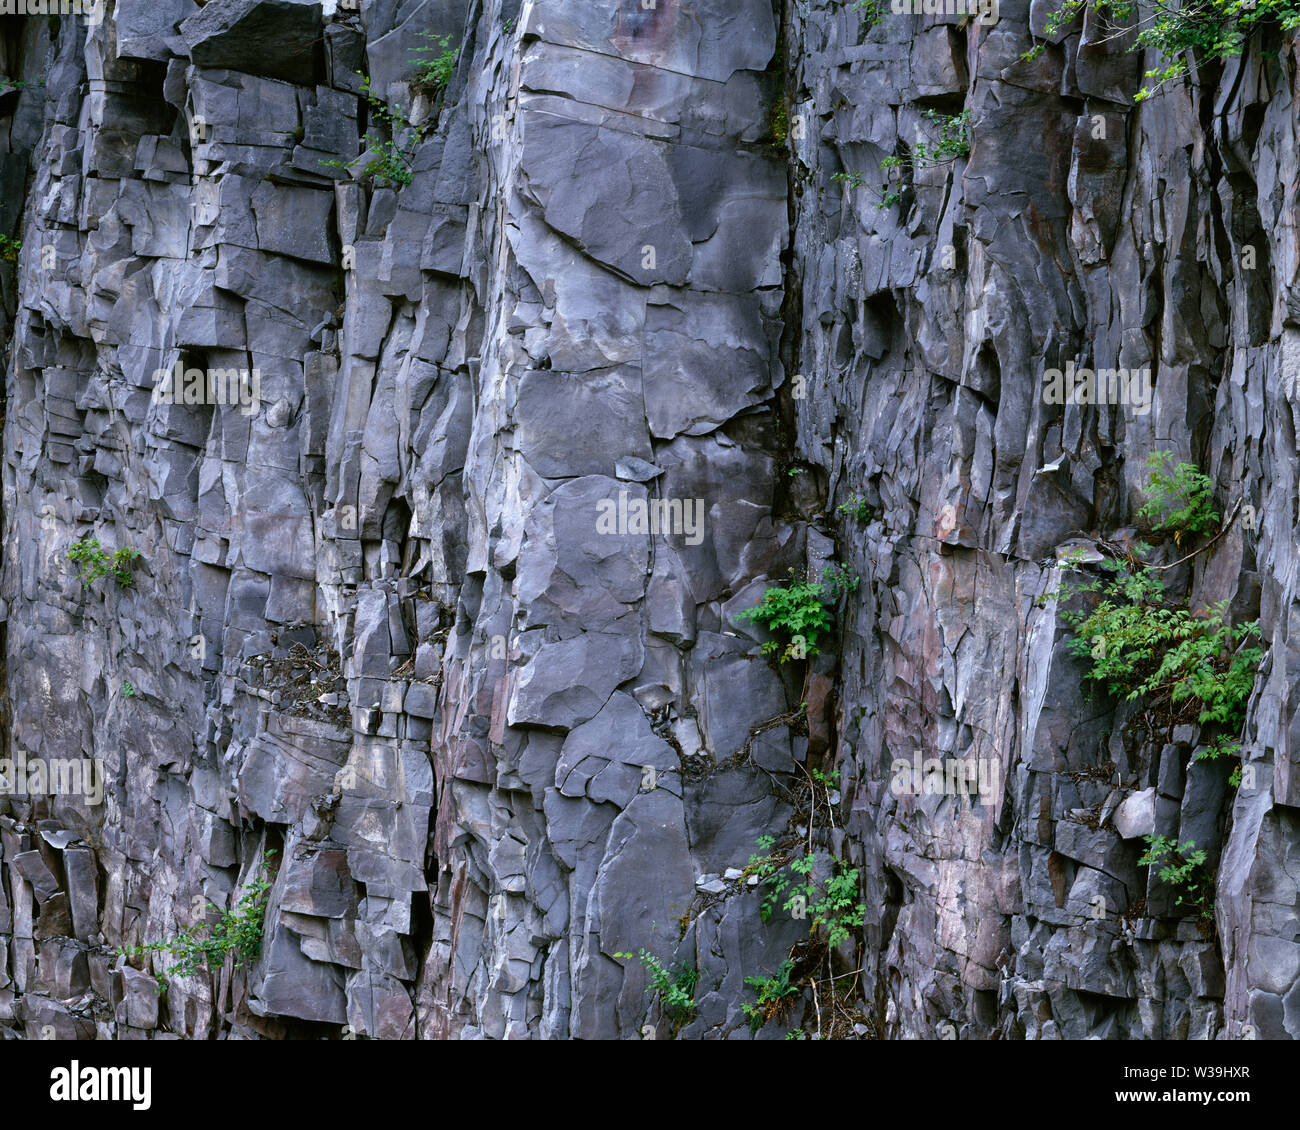 USA, Washington, Mt. Rainier National Park, Scattered plants gain foothold on fractured rock wall in Upper Stevens Canyon. Stock Photo